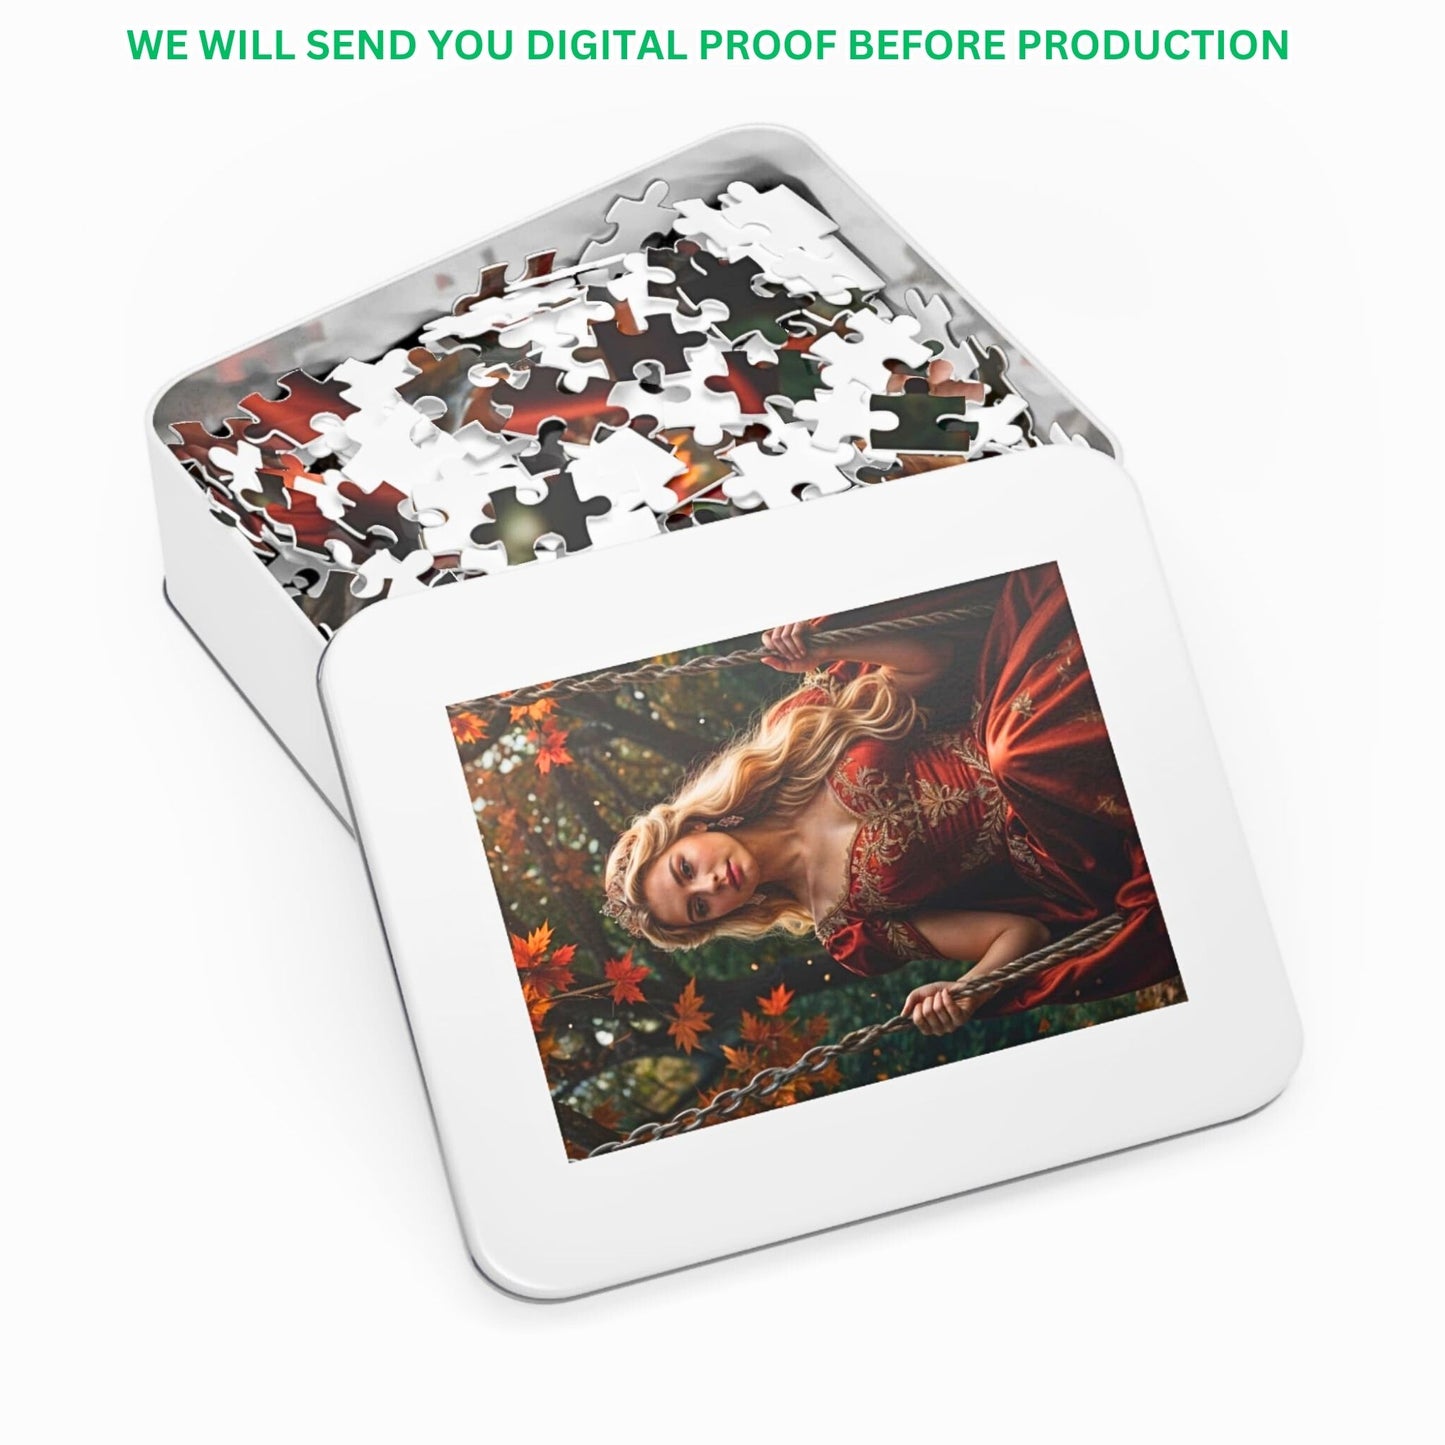 Delve into the regal allure of personalized puzzle portraits, blending history with modern artistry. Capture the essence of royalty with custom designs inspired by Renaissance elegance. Perfect for birthdays and special occasions, each puzzle is crafted from your photos, available as digital downloads. Ideal for those seeking unique and meaningful gifts, combining tradition with contemporary flair in every piece.